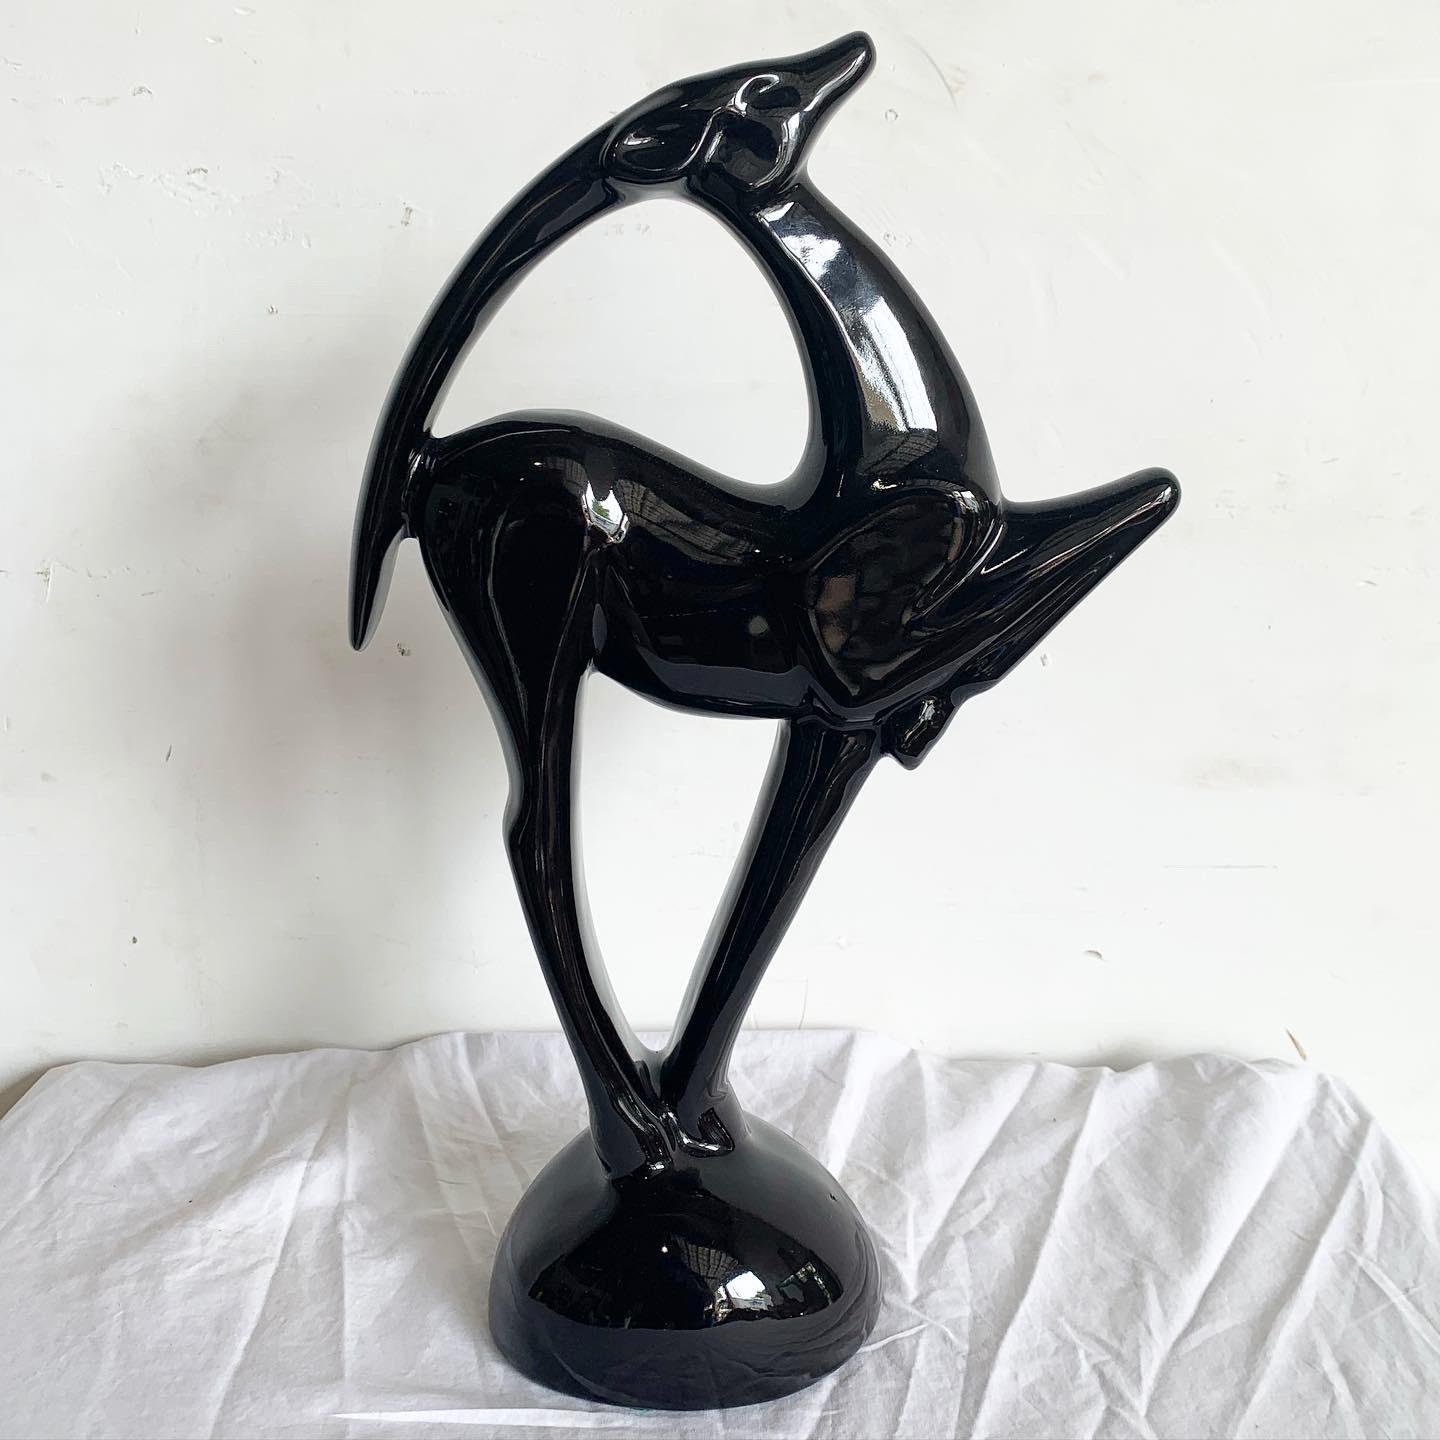 Elevate your decor with the Haeger Ibex Ceramic Sculpture. Crafted in deep black ceramic, this piece captures the majesty of the Ibex with a contemporary twist. Haeger's meticulous craftsmanship is evident in the sculpture's precise detailing and